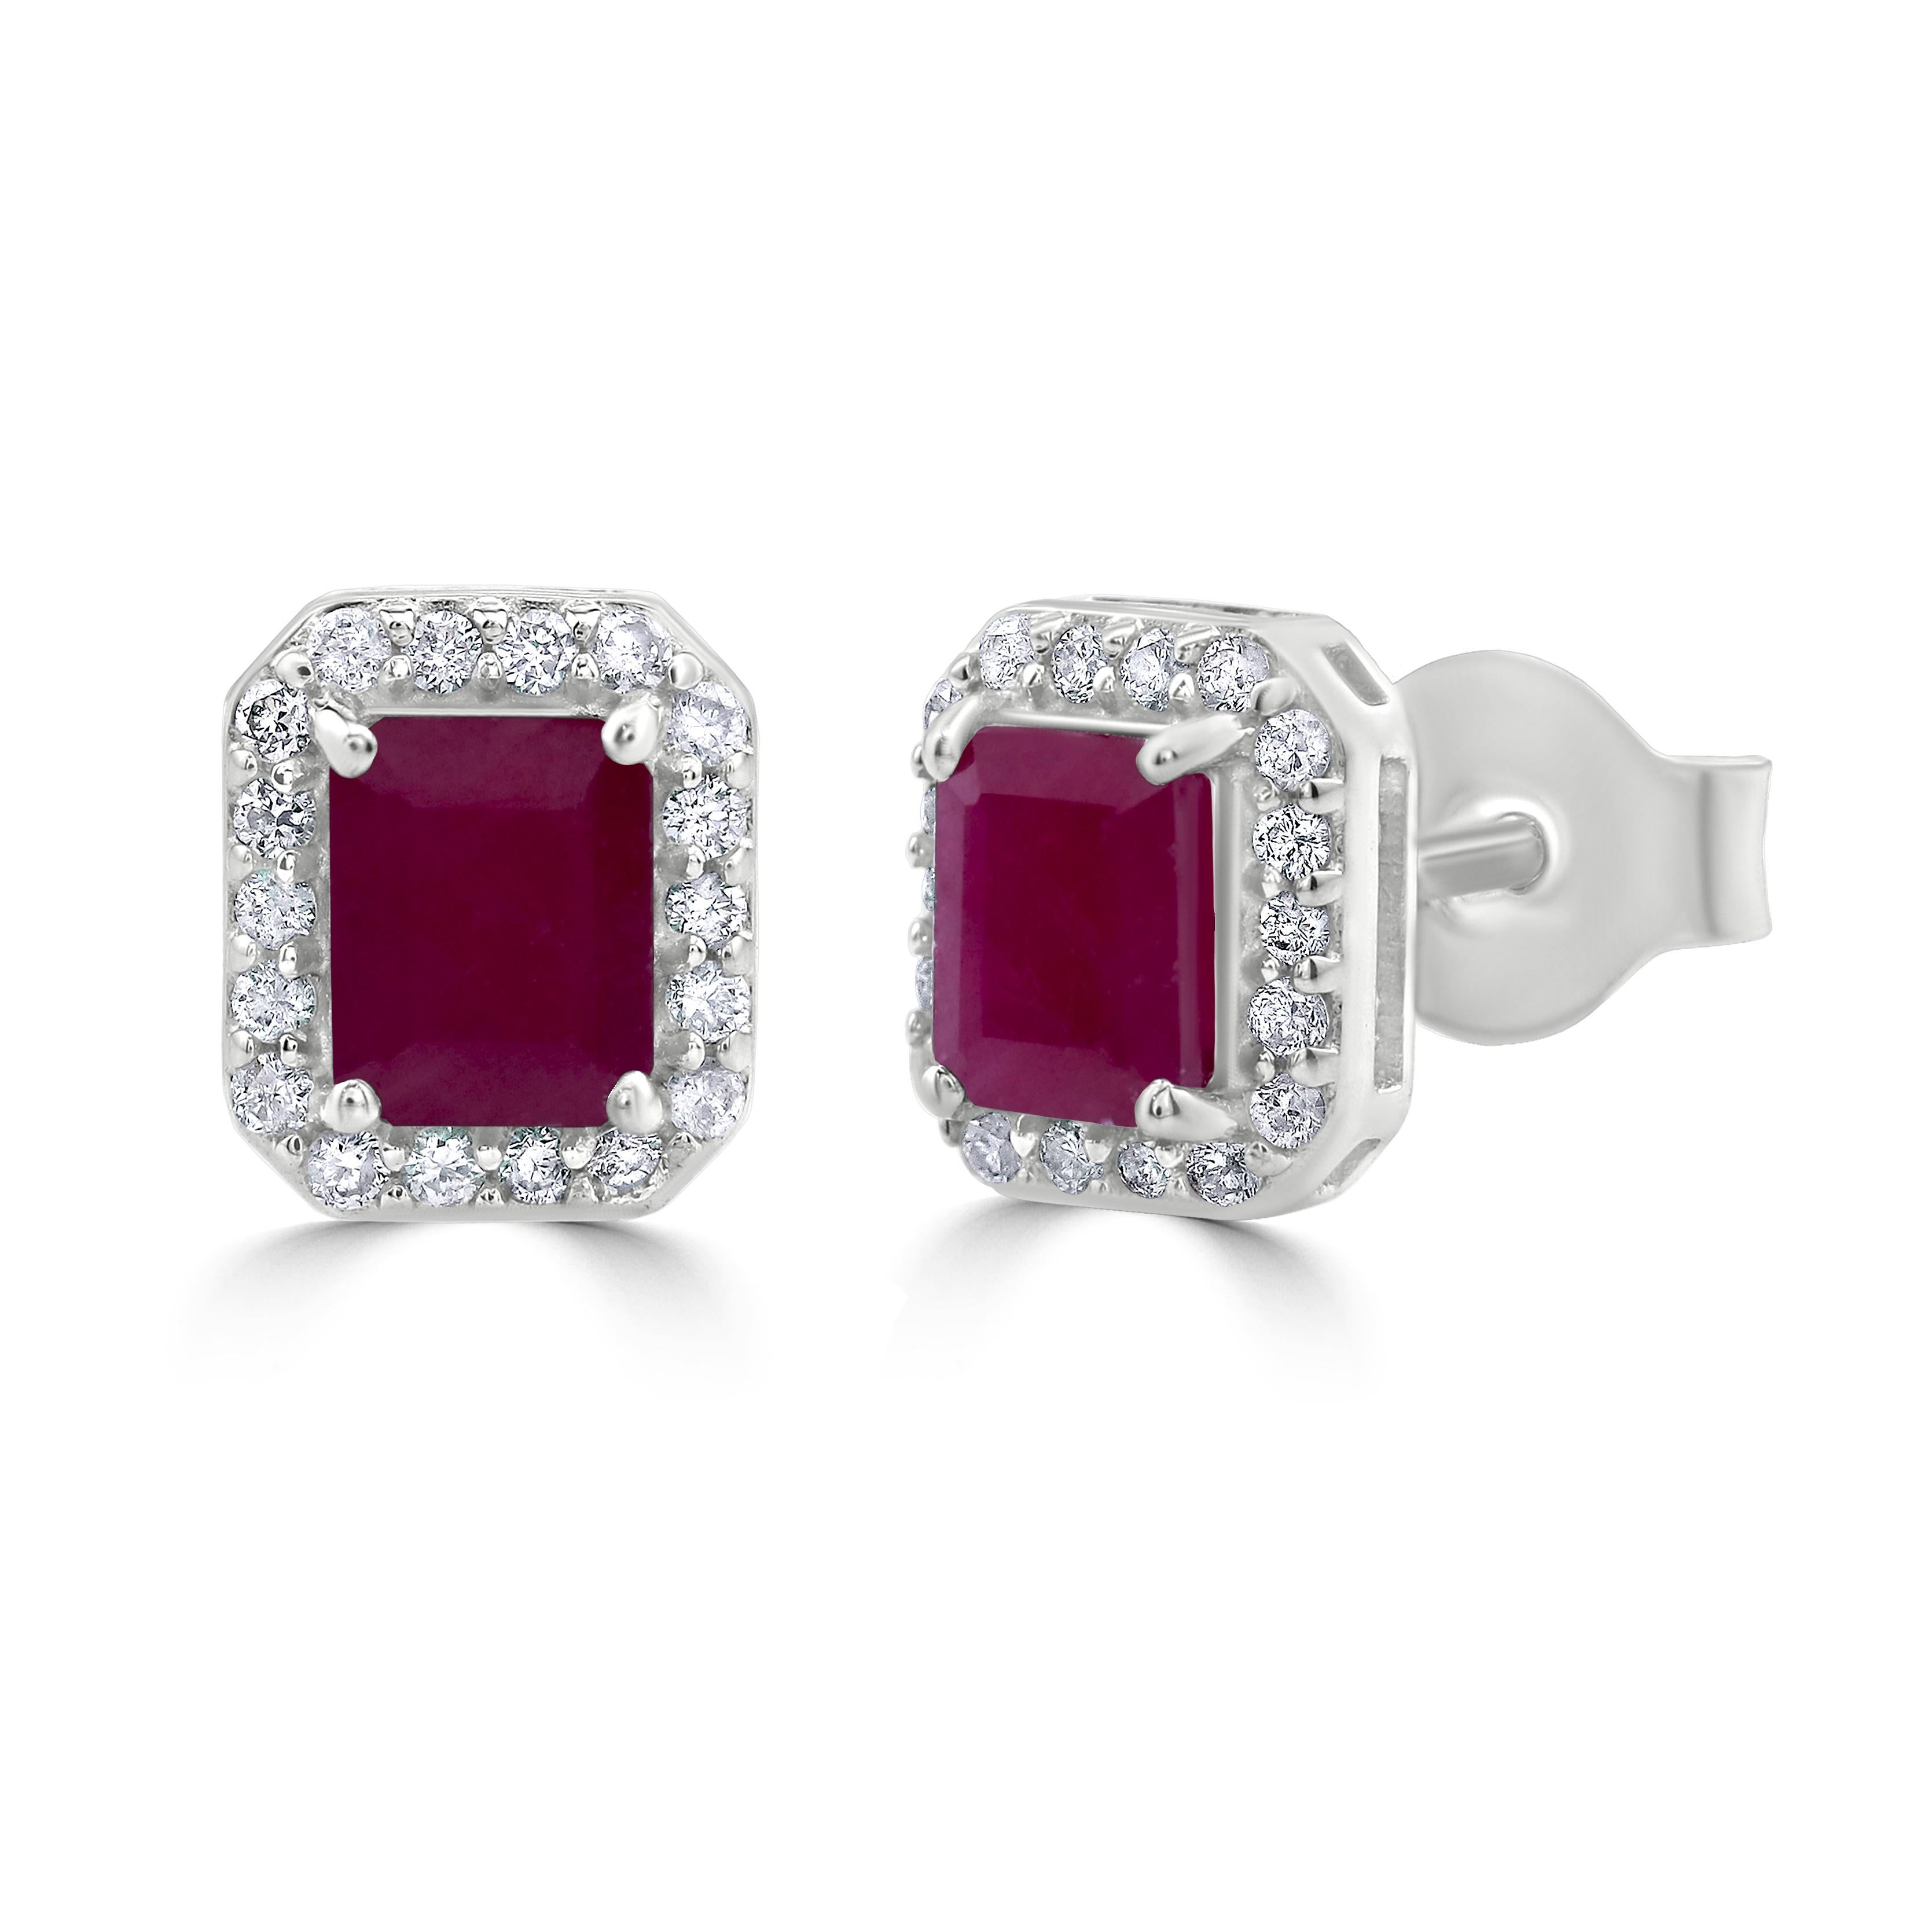 Some of the world's most desirable gemstones come together for this gemstone earring ! These Gemistry stud earrings boast of 1.45 carat octagon rubies at the center in four prongs accentuated by a halo of round and brilliant cut diamonds, prong set